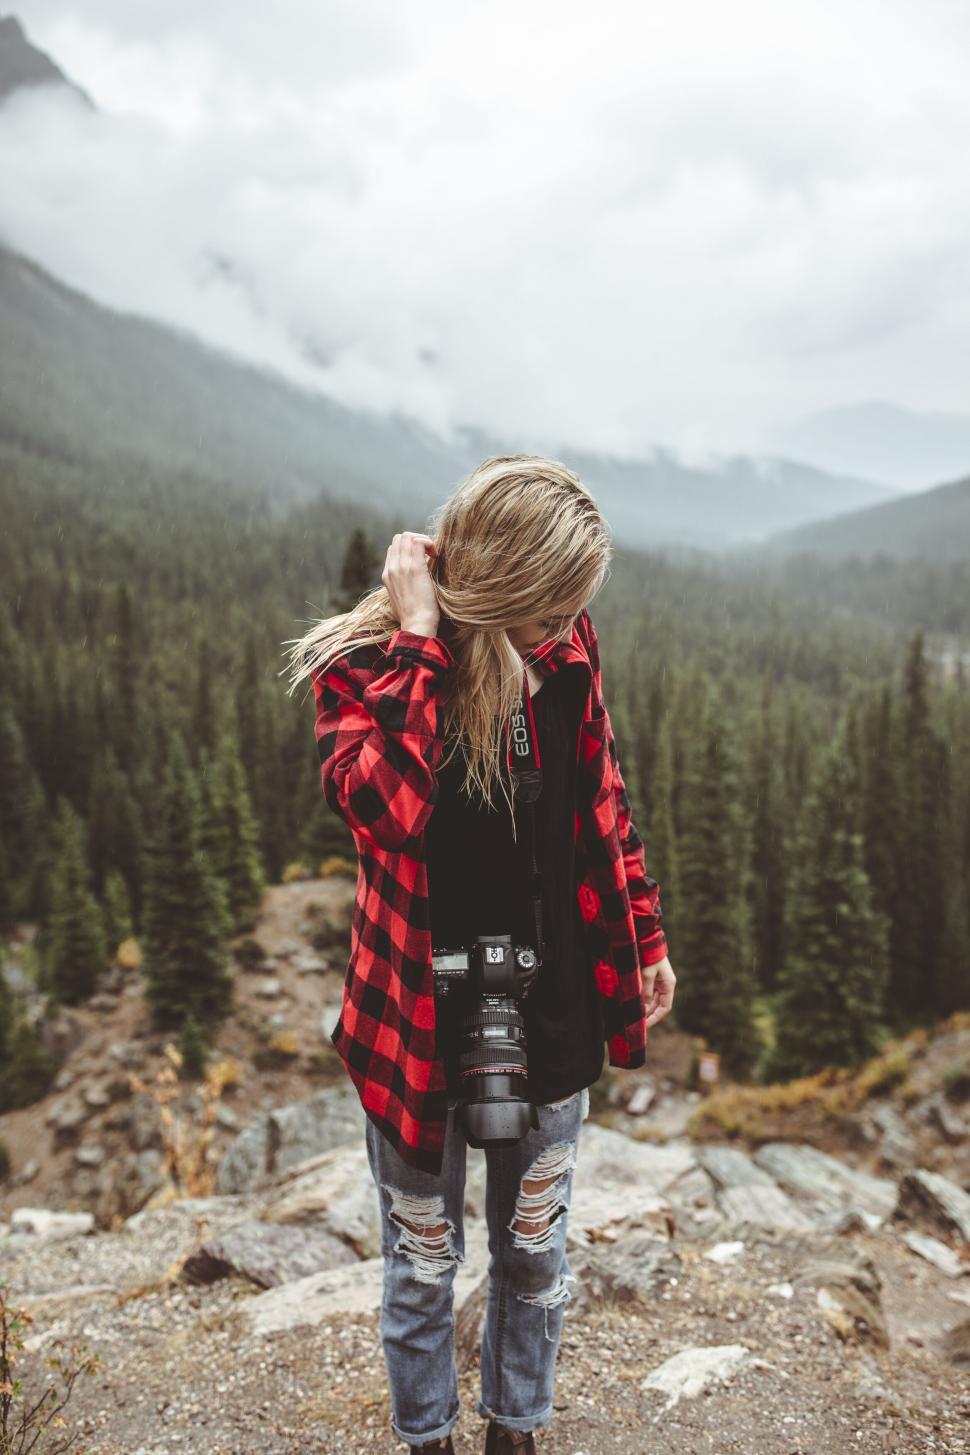 Free Image of Woman hiker with camera in mountainous woods 